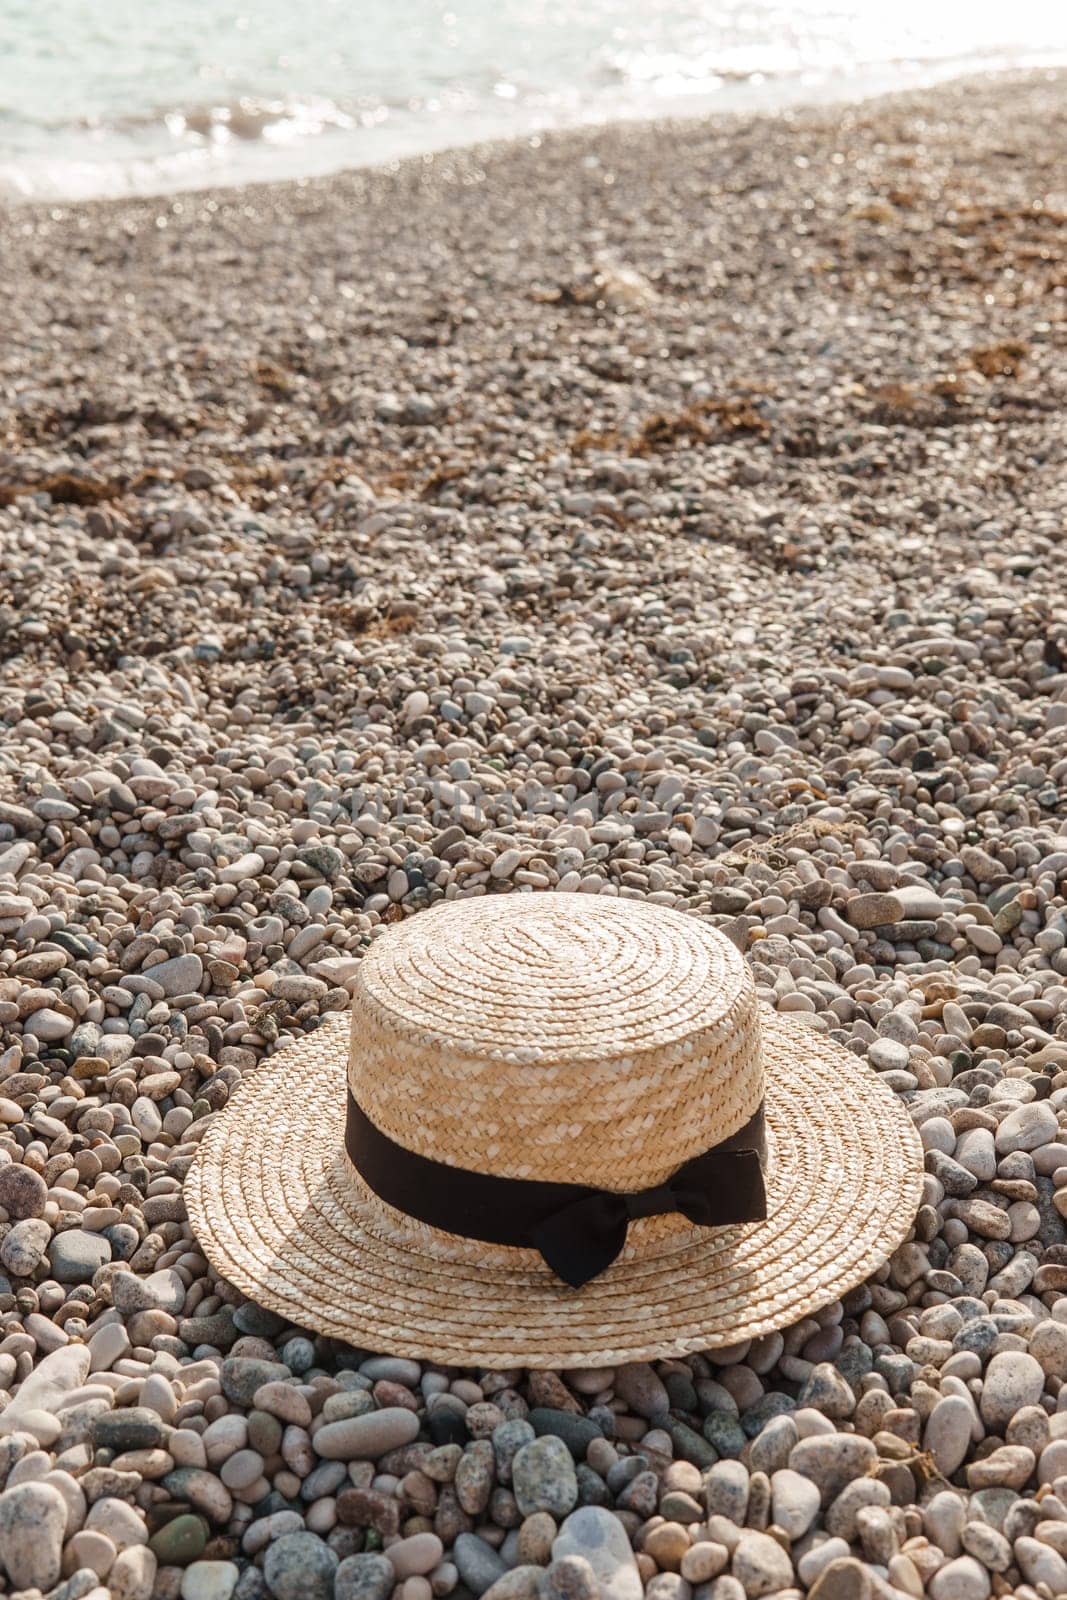 A straw hat on the beach. Pebbles on the seashore, close-up. The natural background.